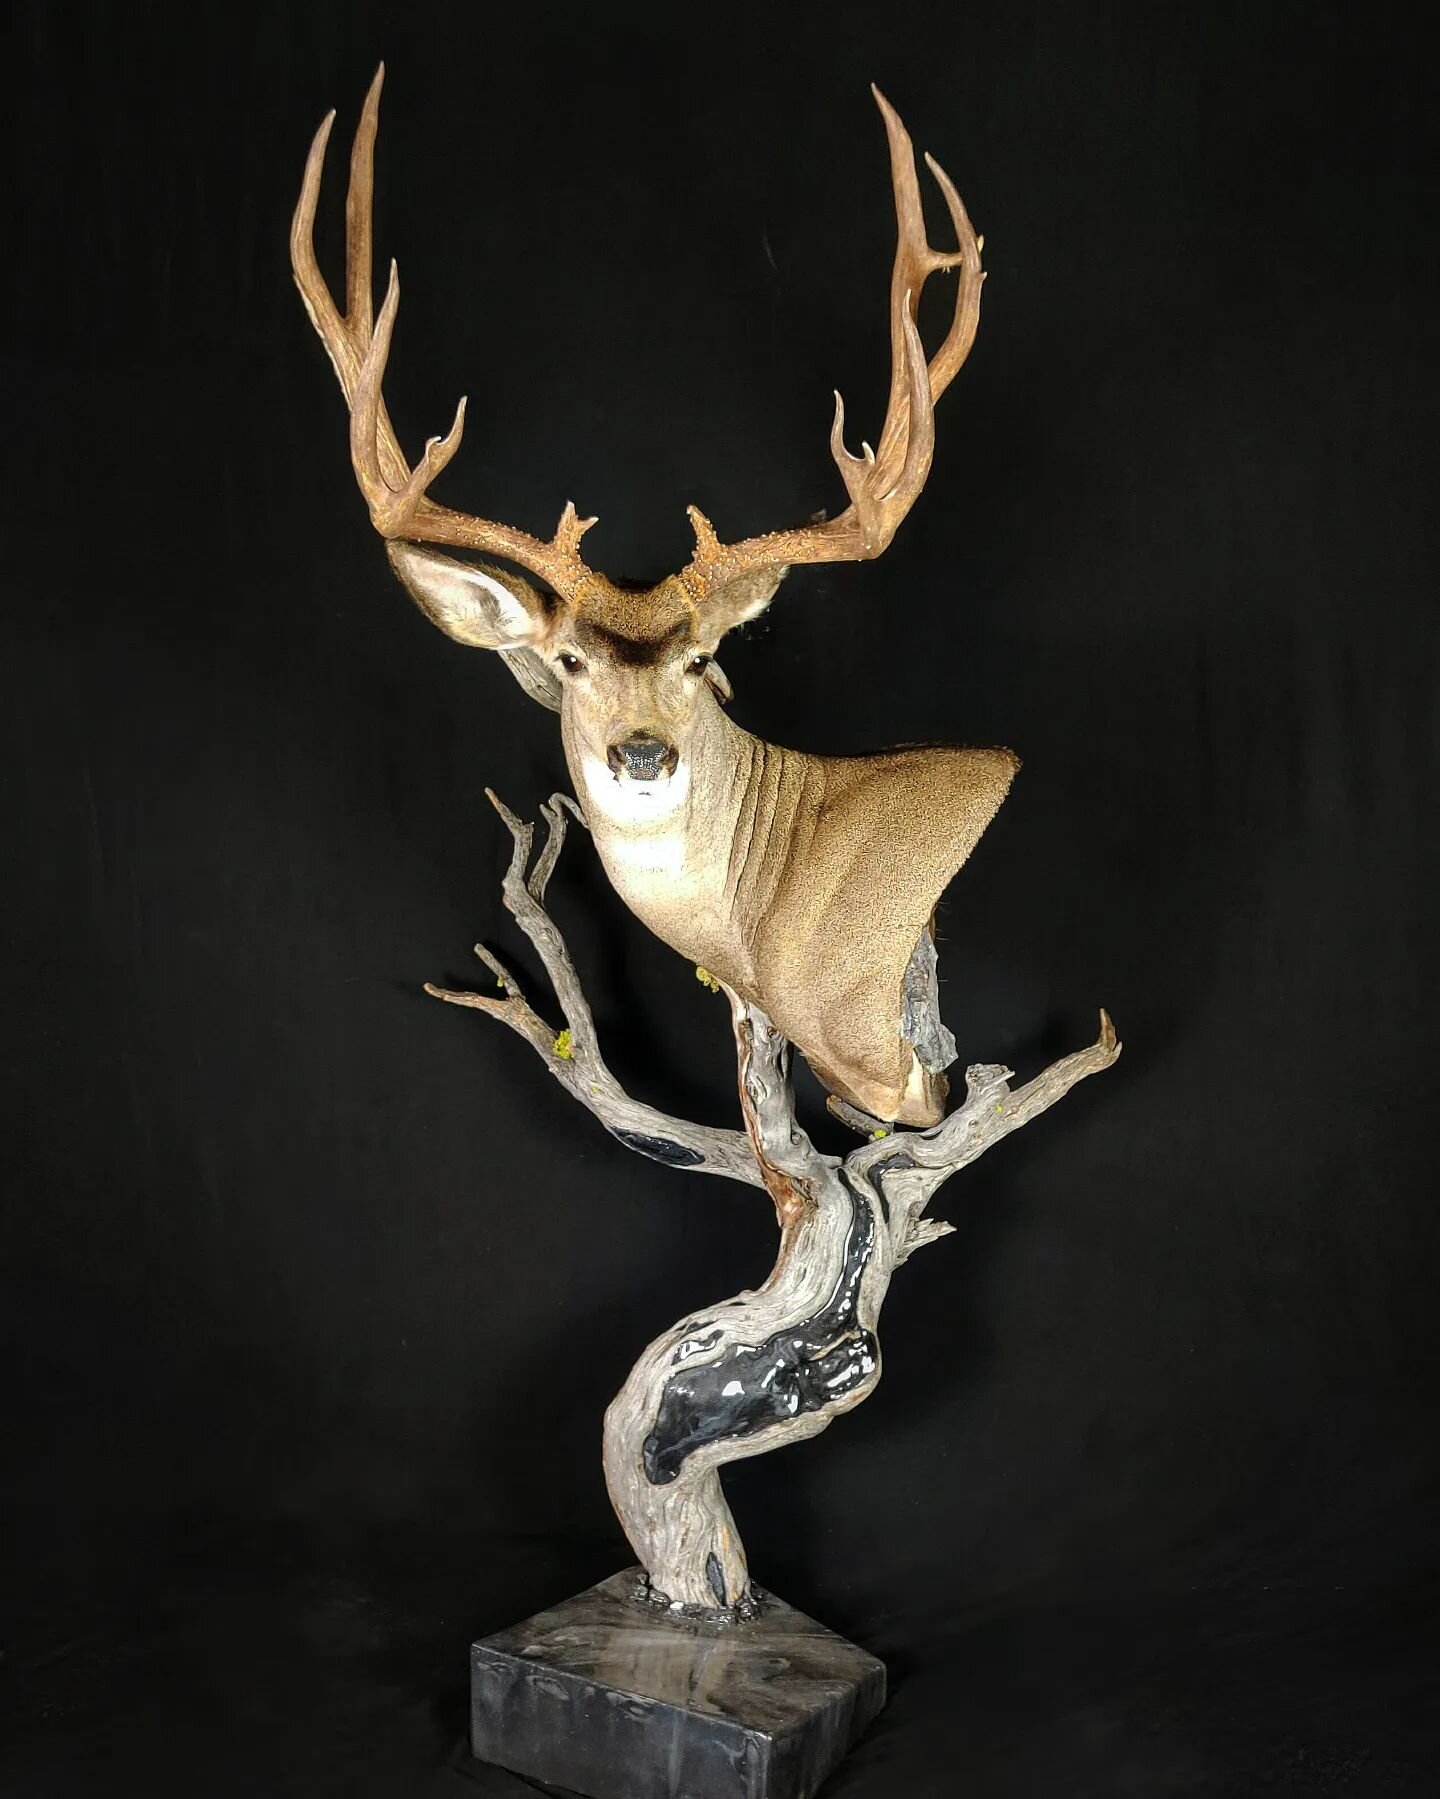 Awesome Idaho muley finished up on a custom built pedestal by the client. It truly is a privilege to be able to do what we do for a living. #muleymonday #muley #archeryhunting #buck #muledeerfoundation #Idaho #taxidermy #idahotaxidermy #biggame #bigg